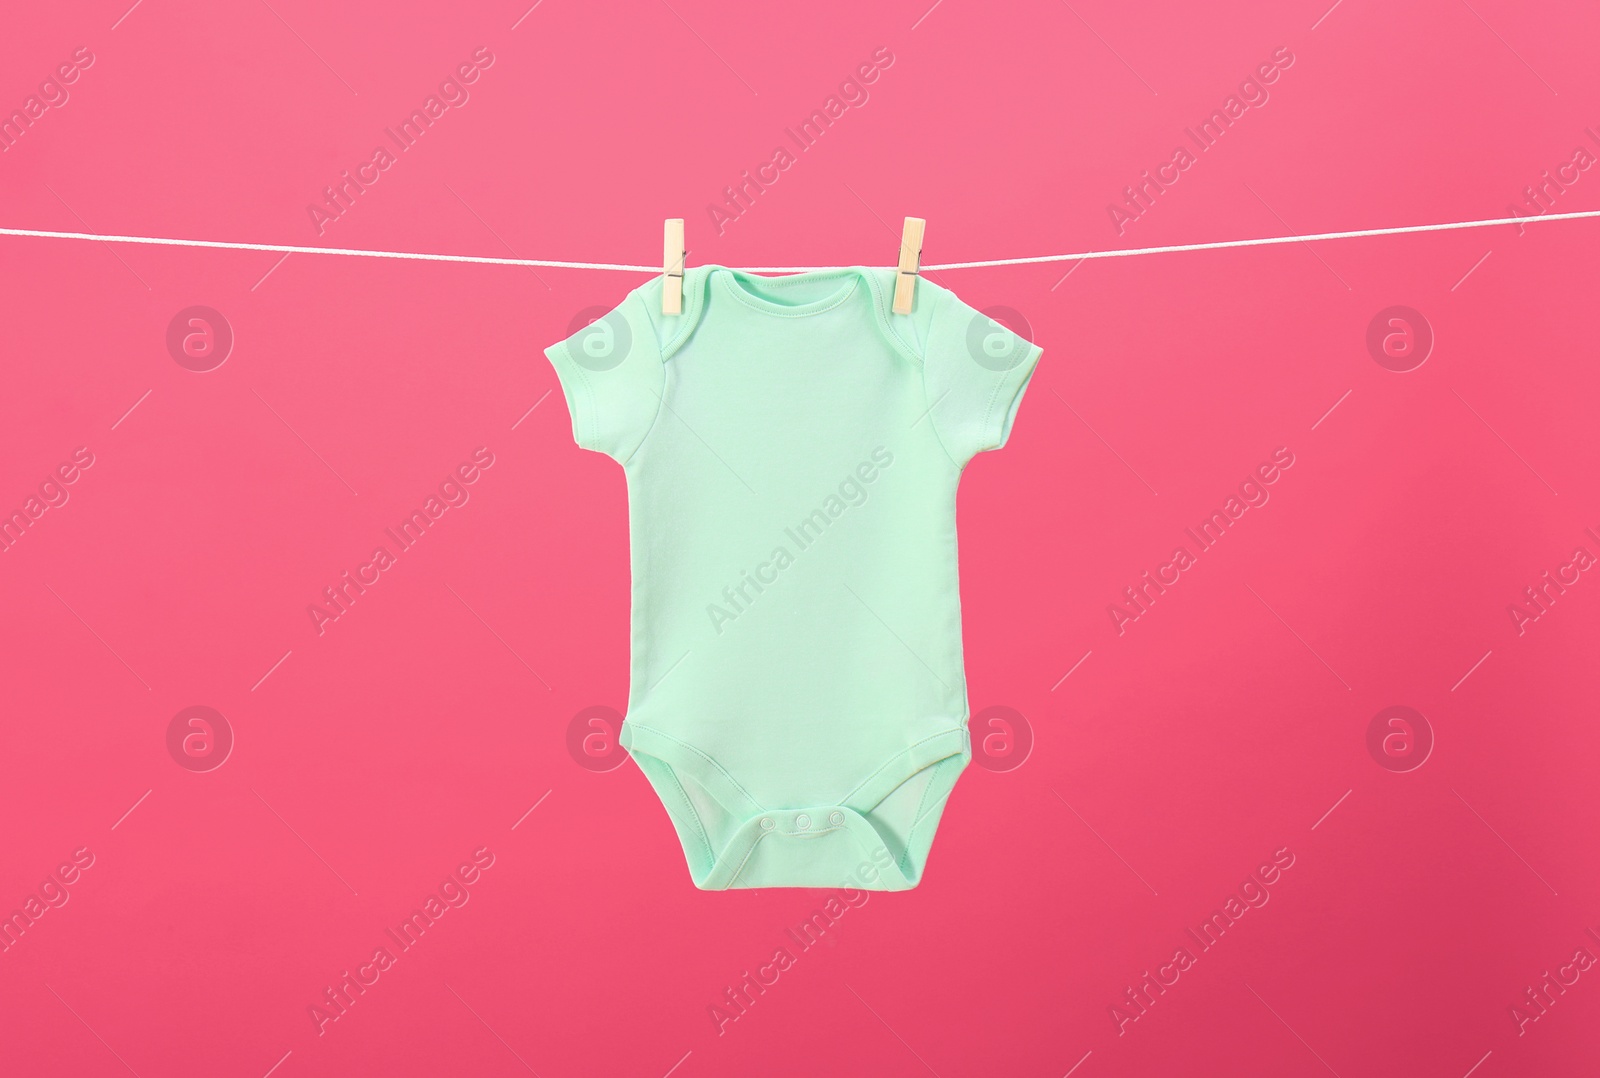 Photo of Baby onesie hanging on clothes line against pink background